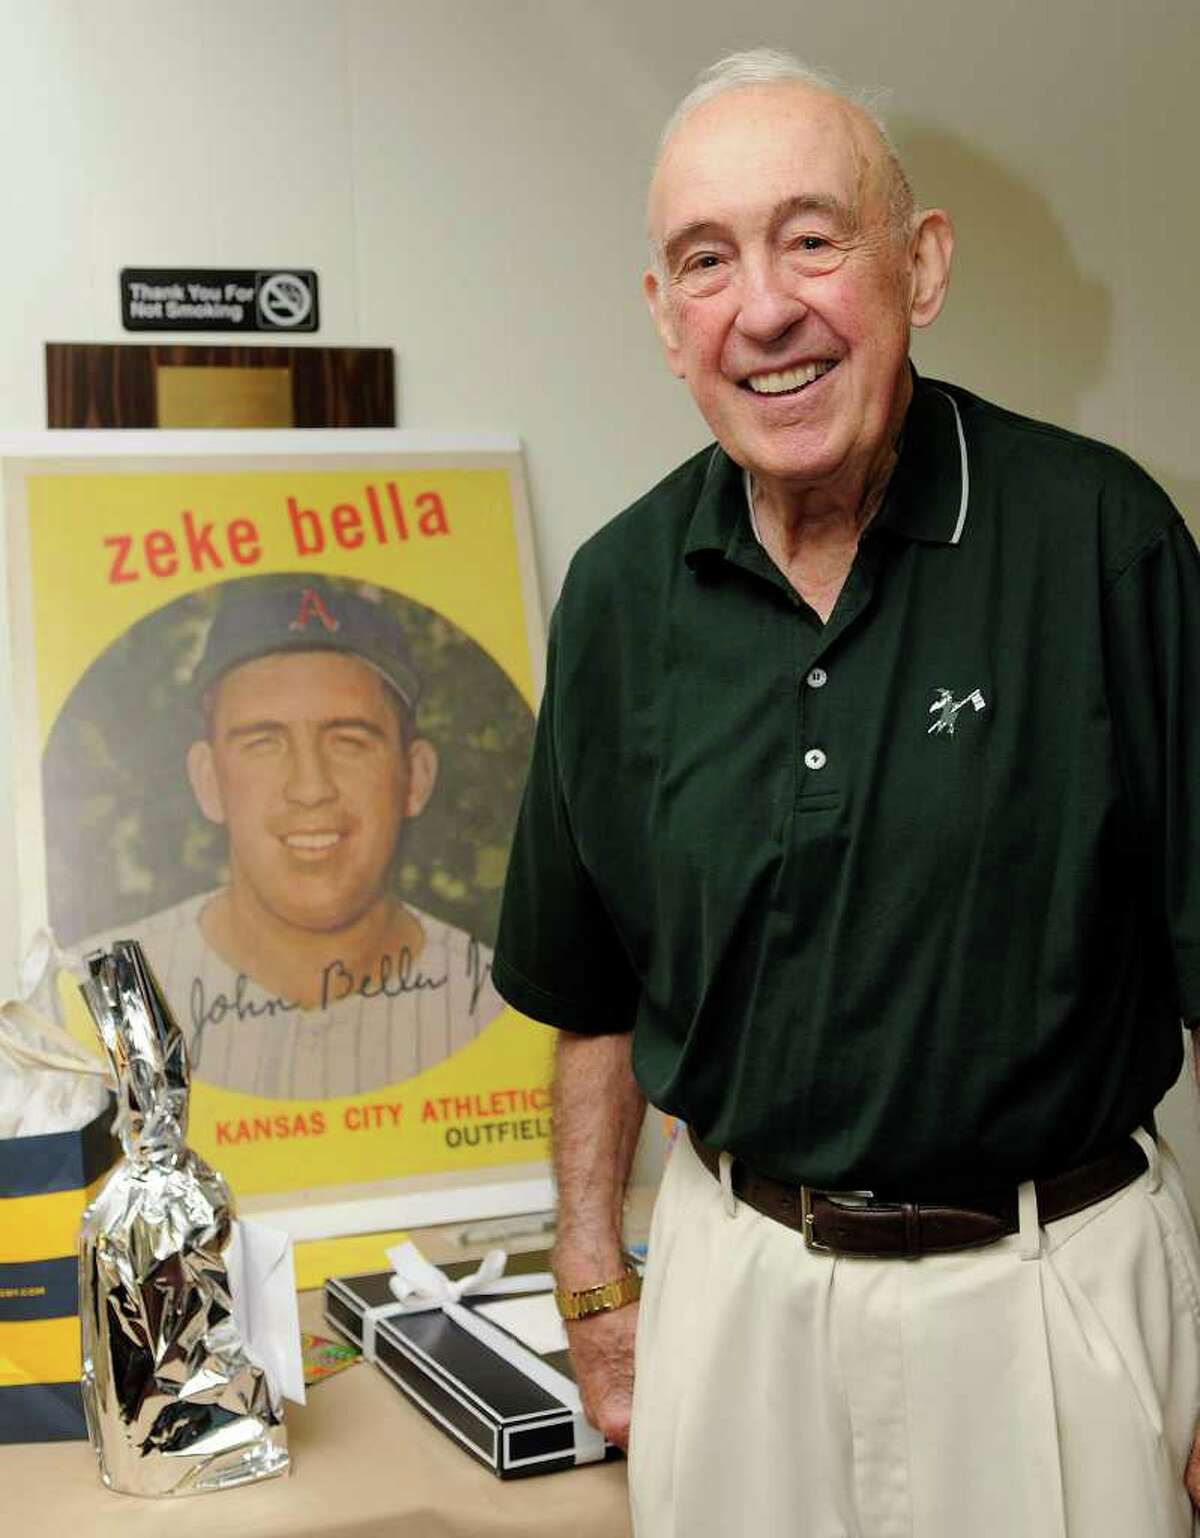 Cos Cob's John "Zeke" Bella, former outfielder for the New York Yankees and Kansas City Athletics, stands in front of a replica of his baseball card during his 80th birthday party with friends and family at the St. Lawrence Club in Cos Cob in August.